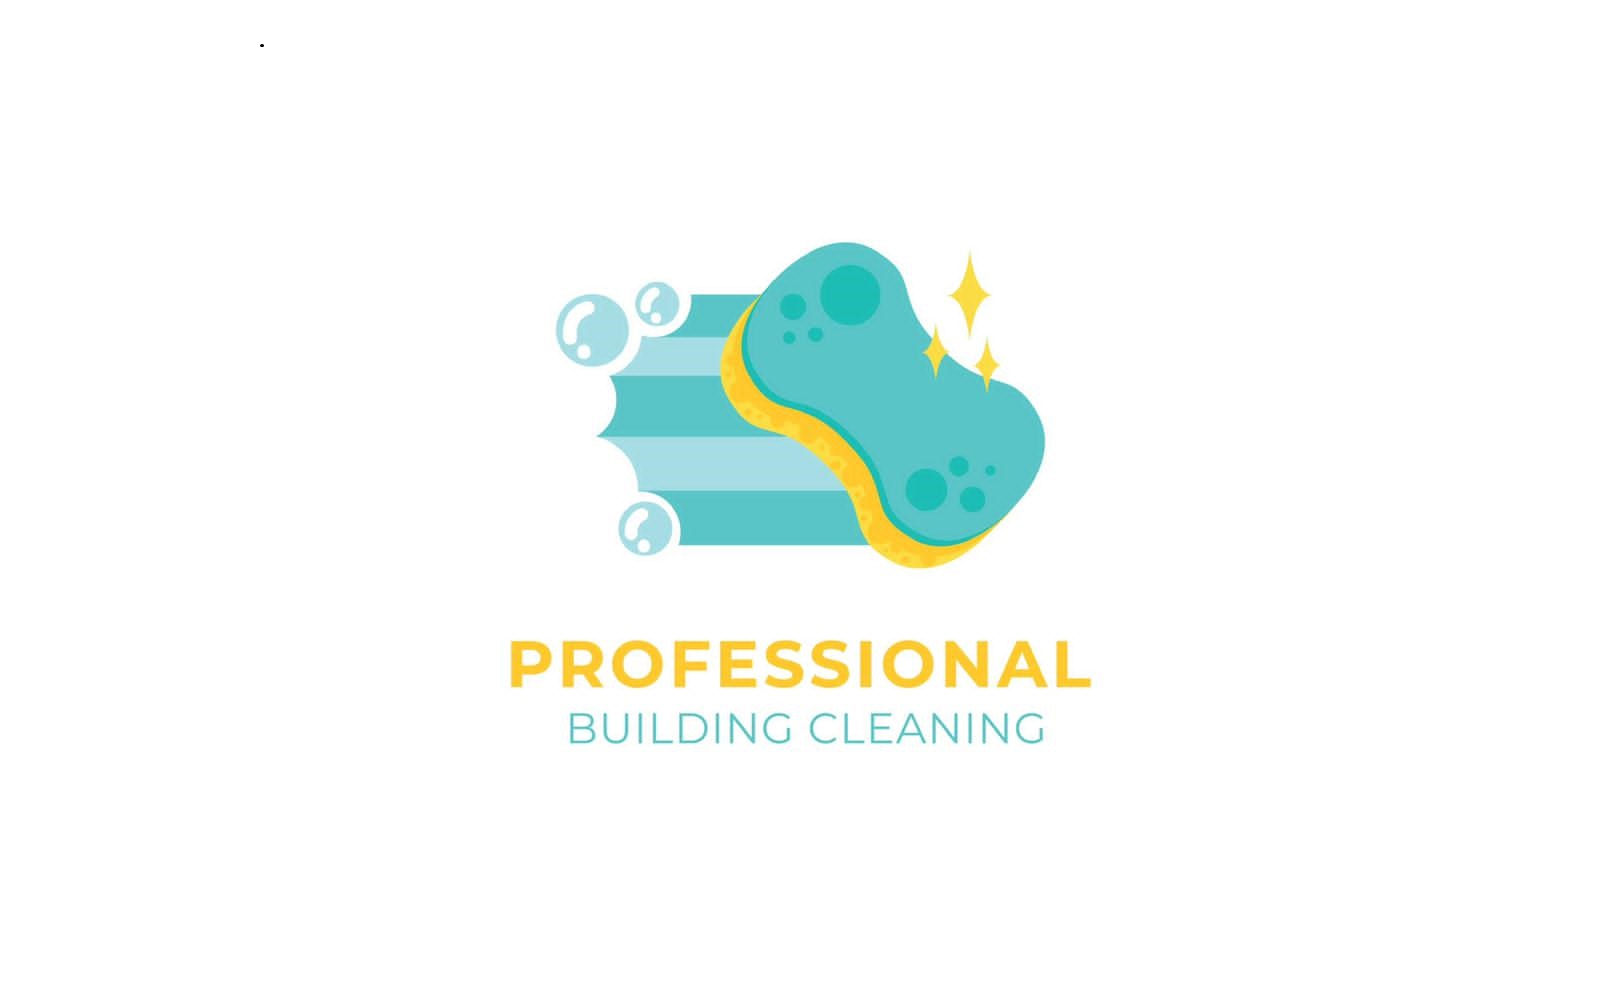 Professional Building Cleaning